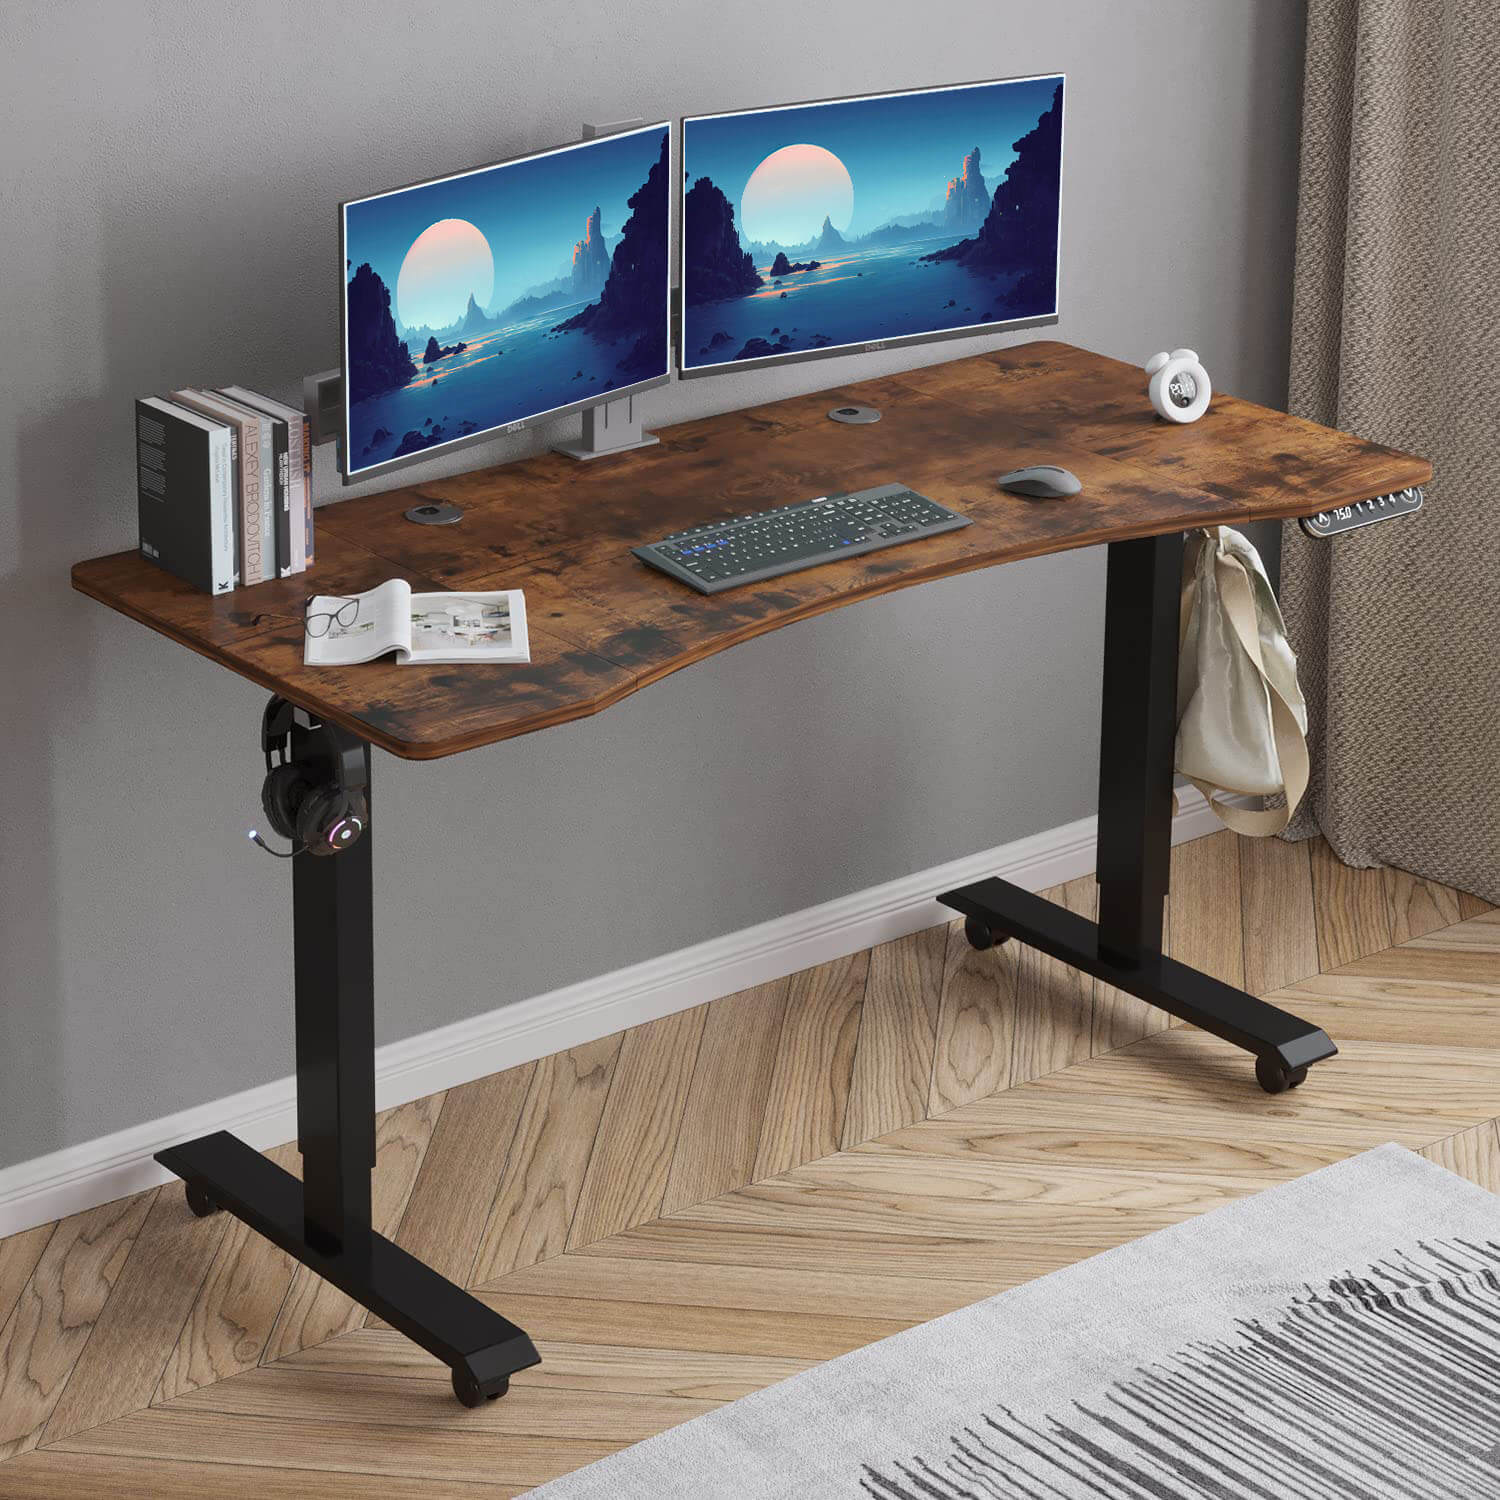 Deskohilo 55"x 30" Standing Desk Electric Height Adjustable Office Tables for Work Benches with Wheels, Oak or Brown